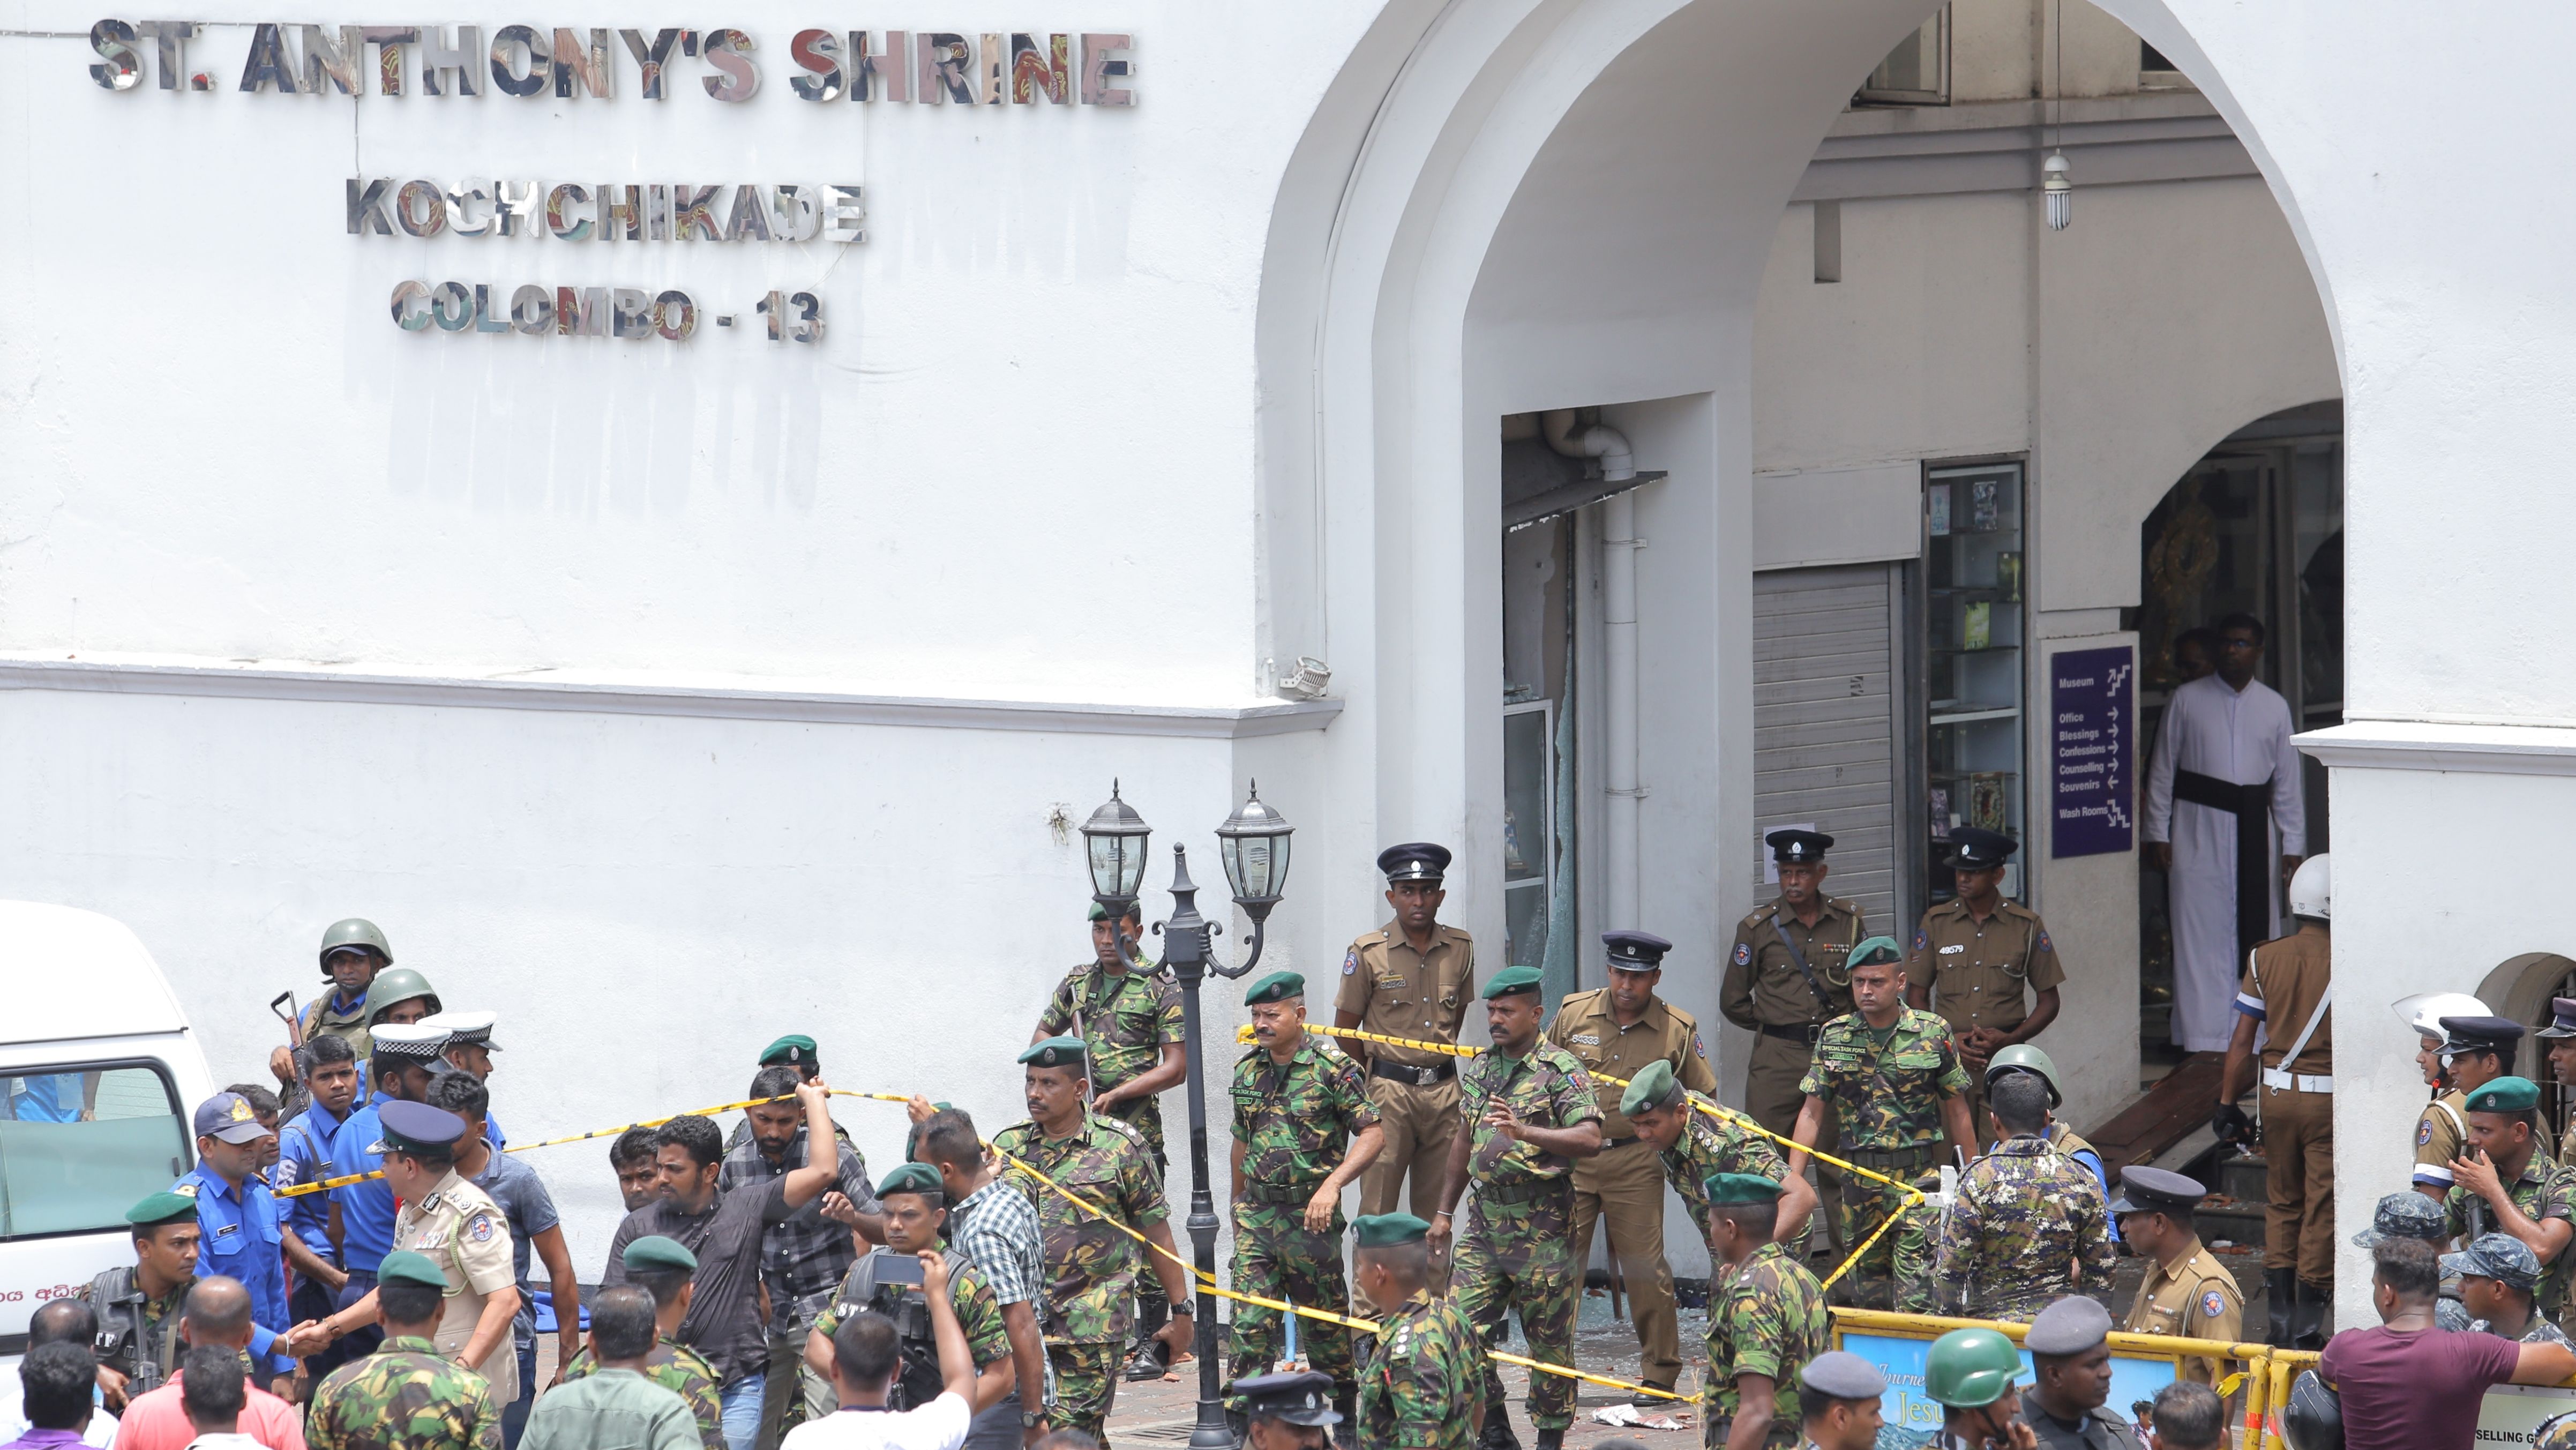 Sri Lankan military officers stand guard in front of St. Anthony's Shrine.